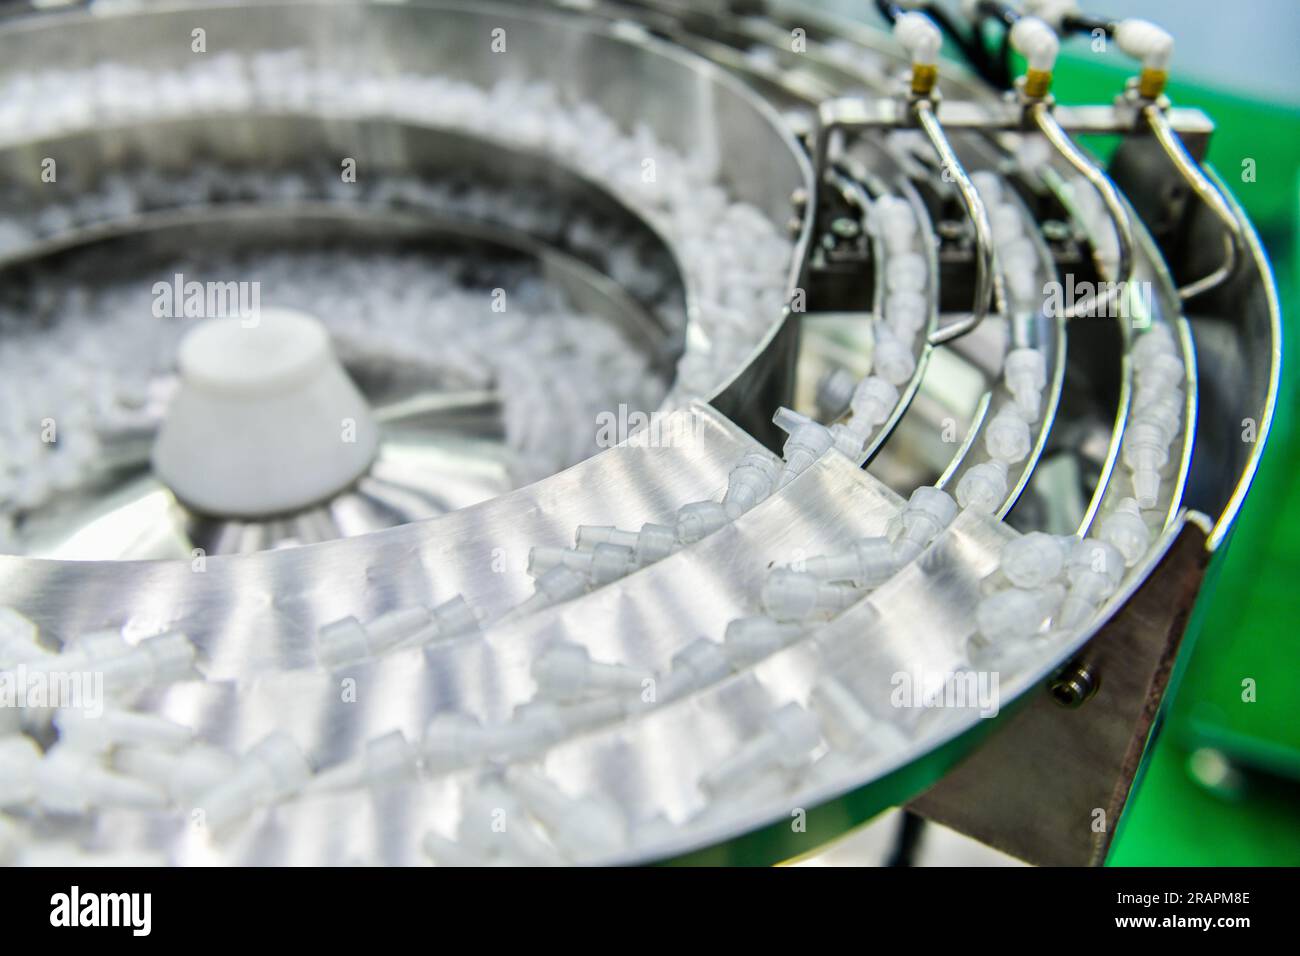 Many small part of Extension tube (medical equipment components) by manufacturing process in factory Stock Photo